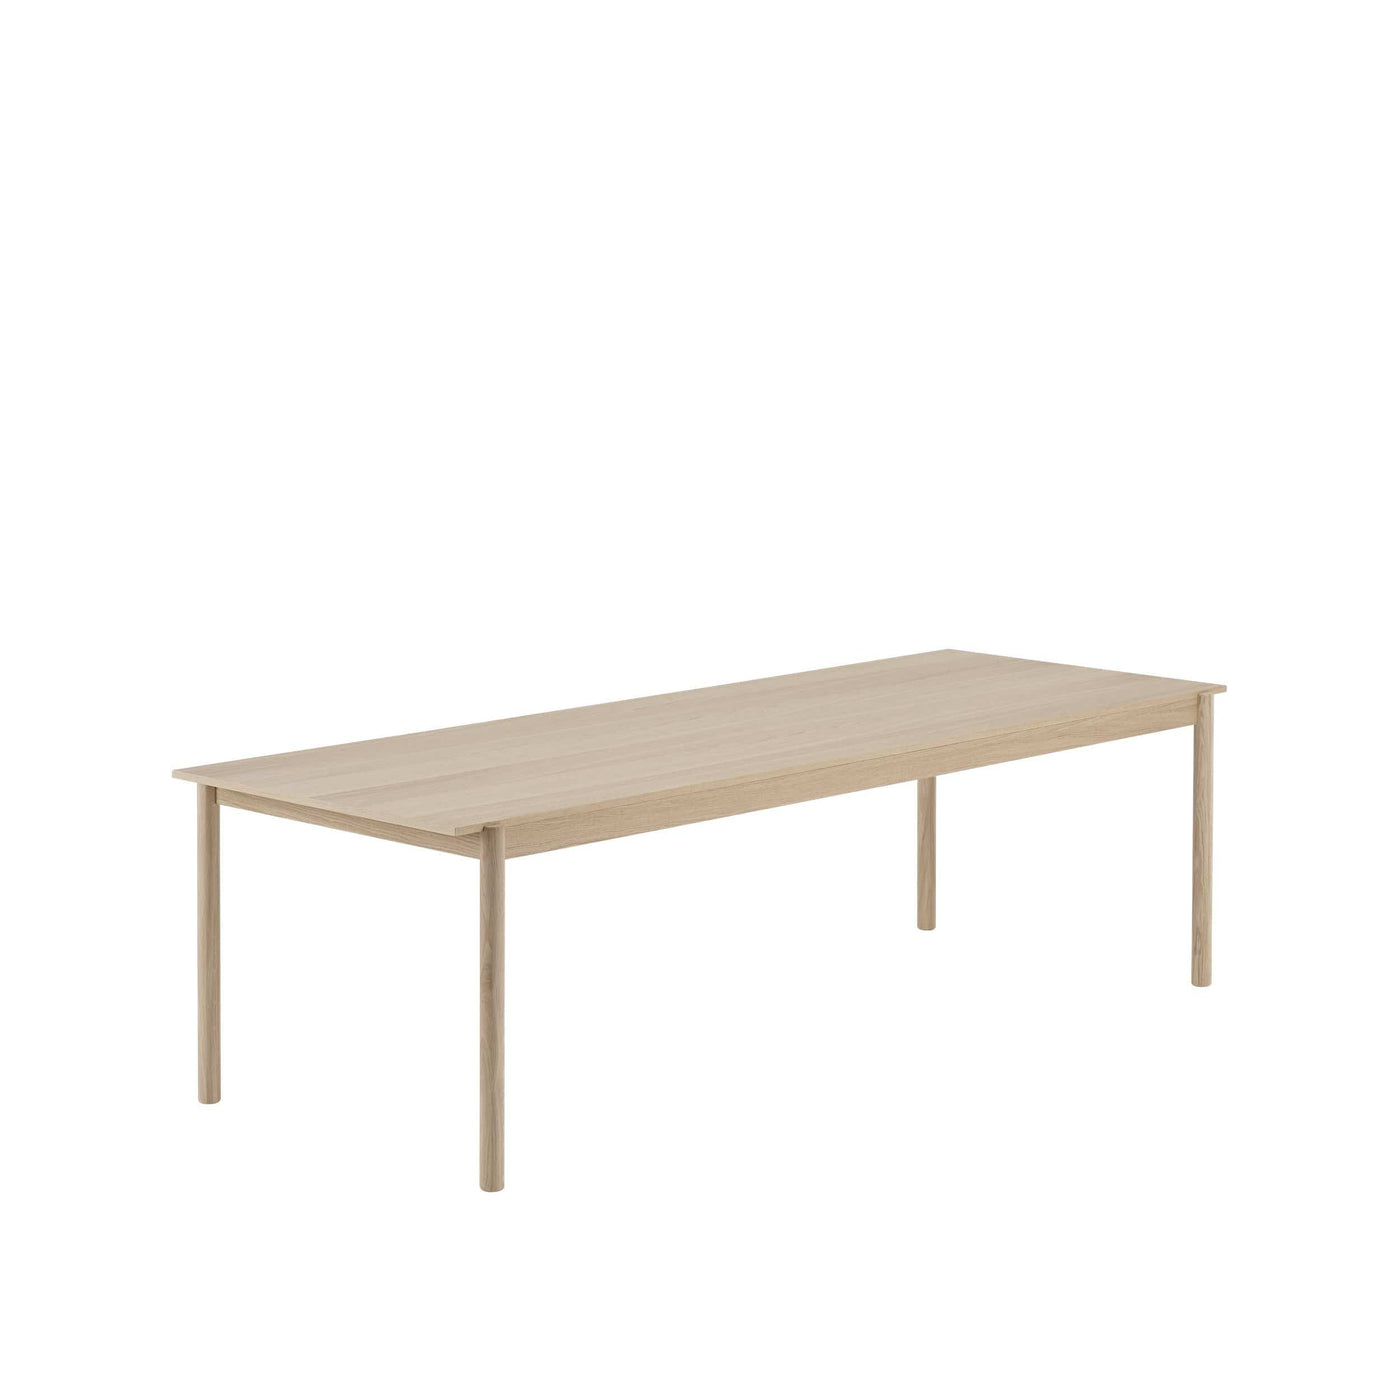 Muuto Linear Wood Table 90x260cm, available from someday designs. #size_90x260